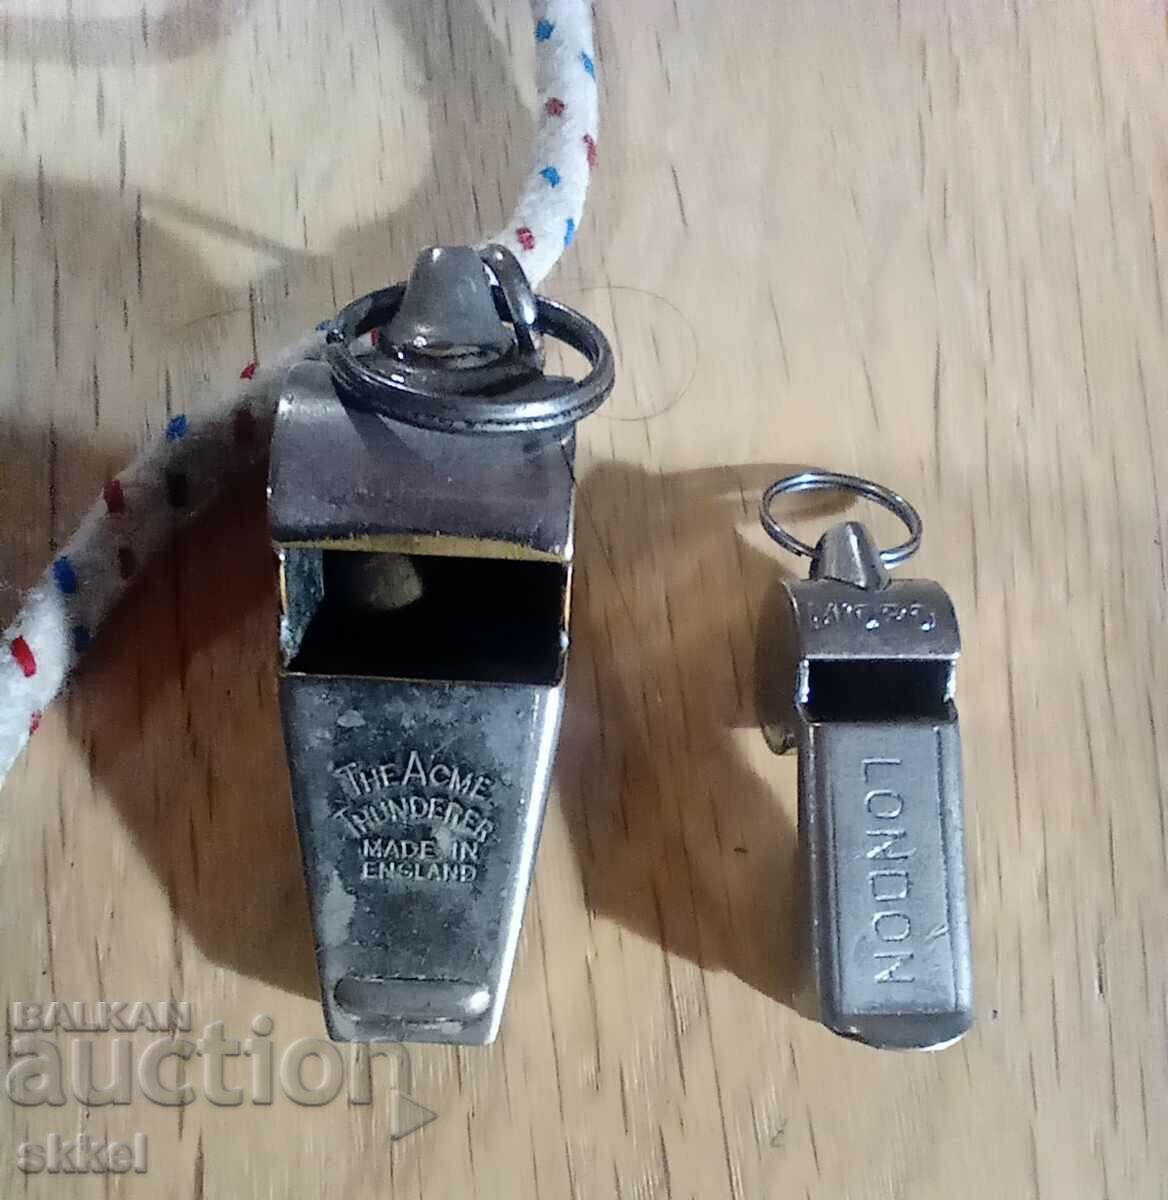 Football referee whistle official 2 pieces 1960s